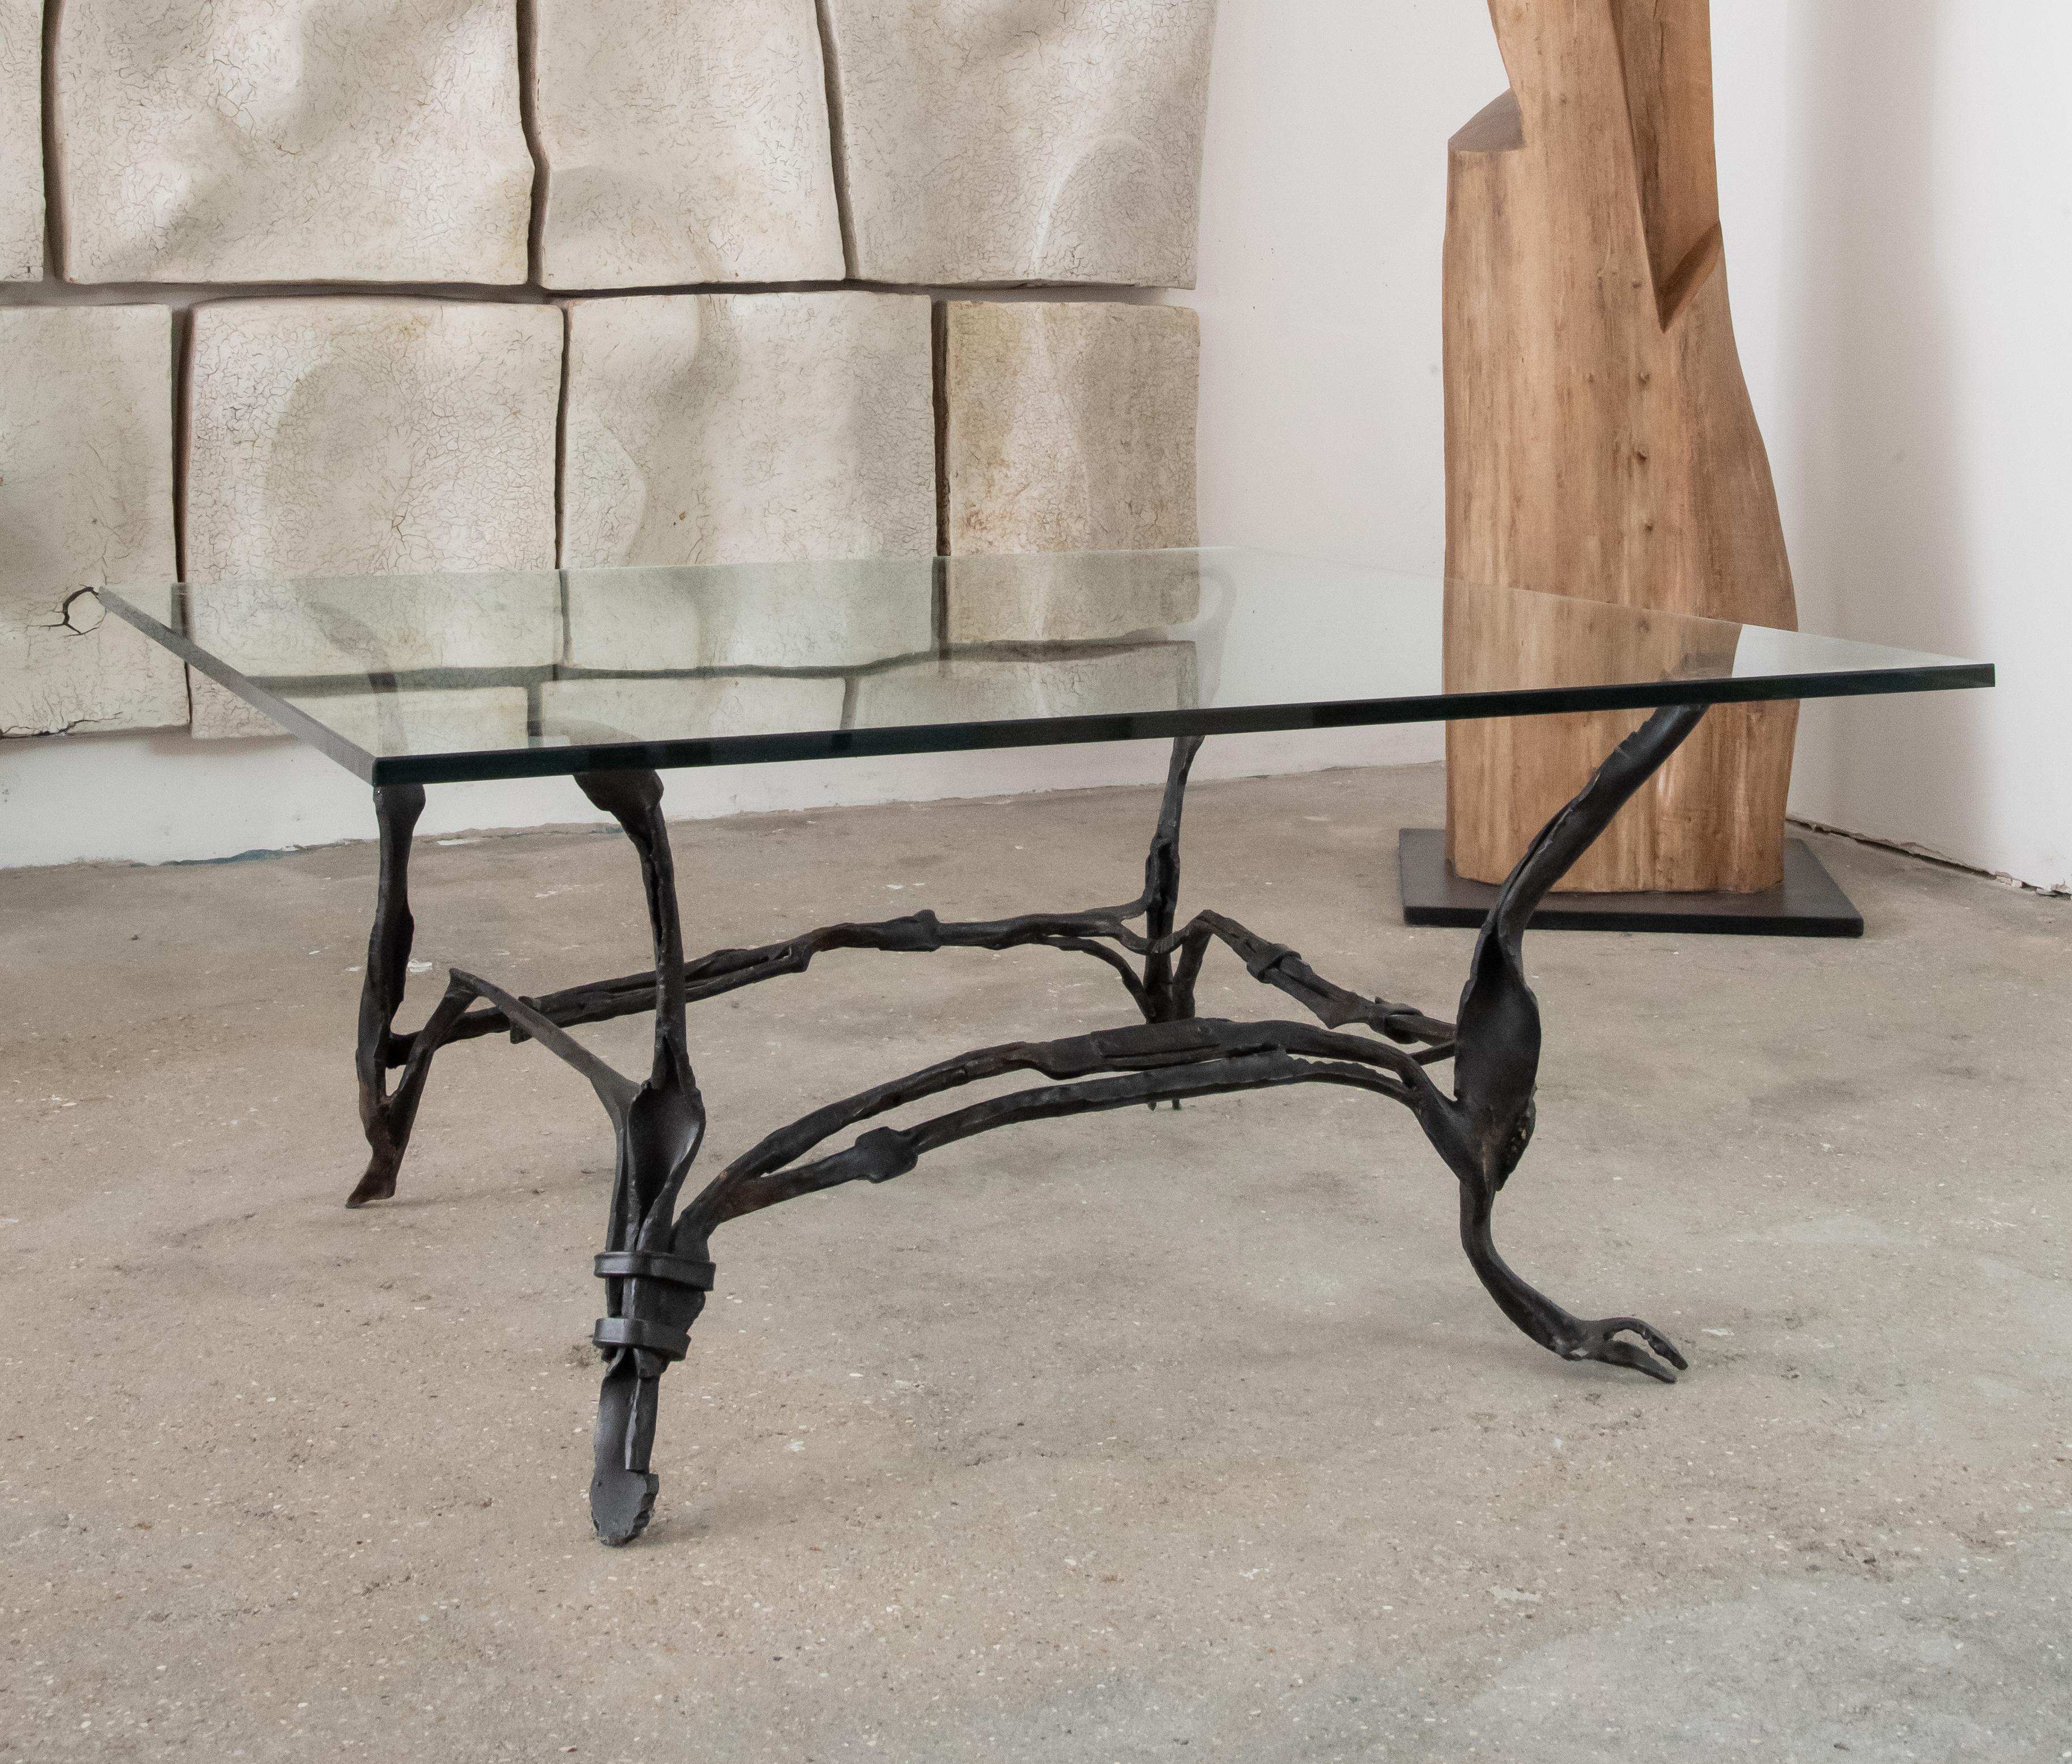 Forged Contemporary Wrought Iron Coffee Table by Nicolas Thevenin For Sale